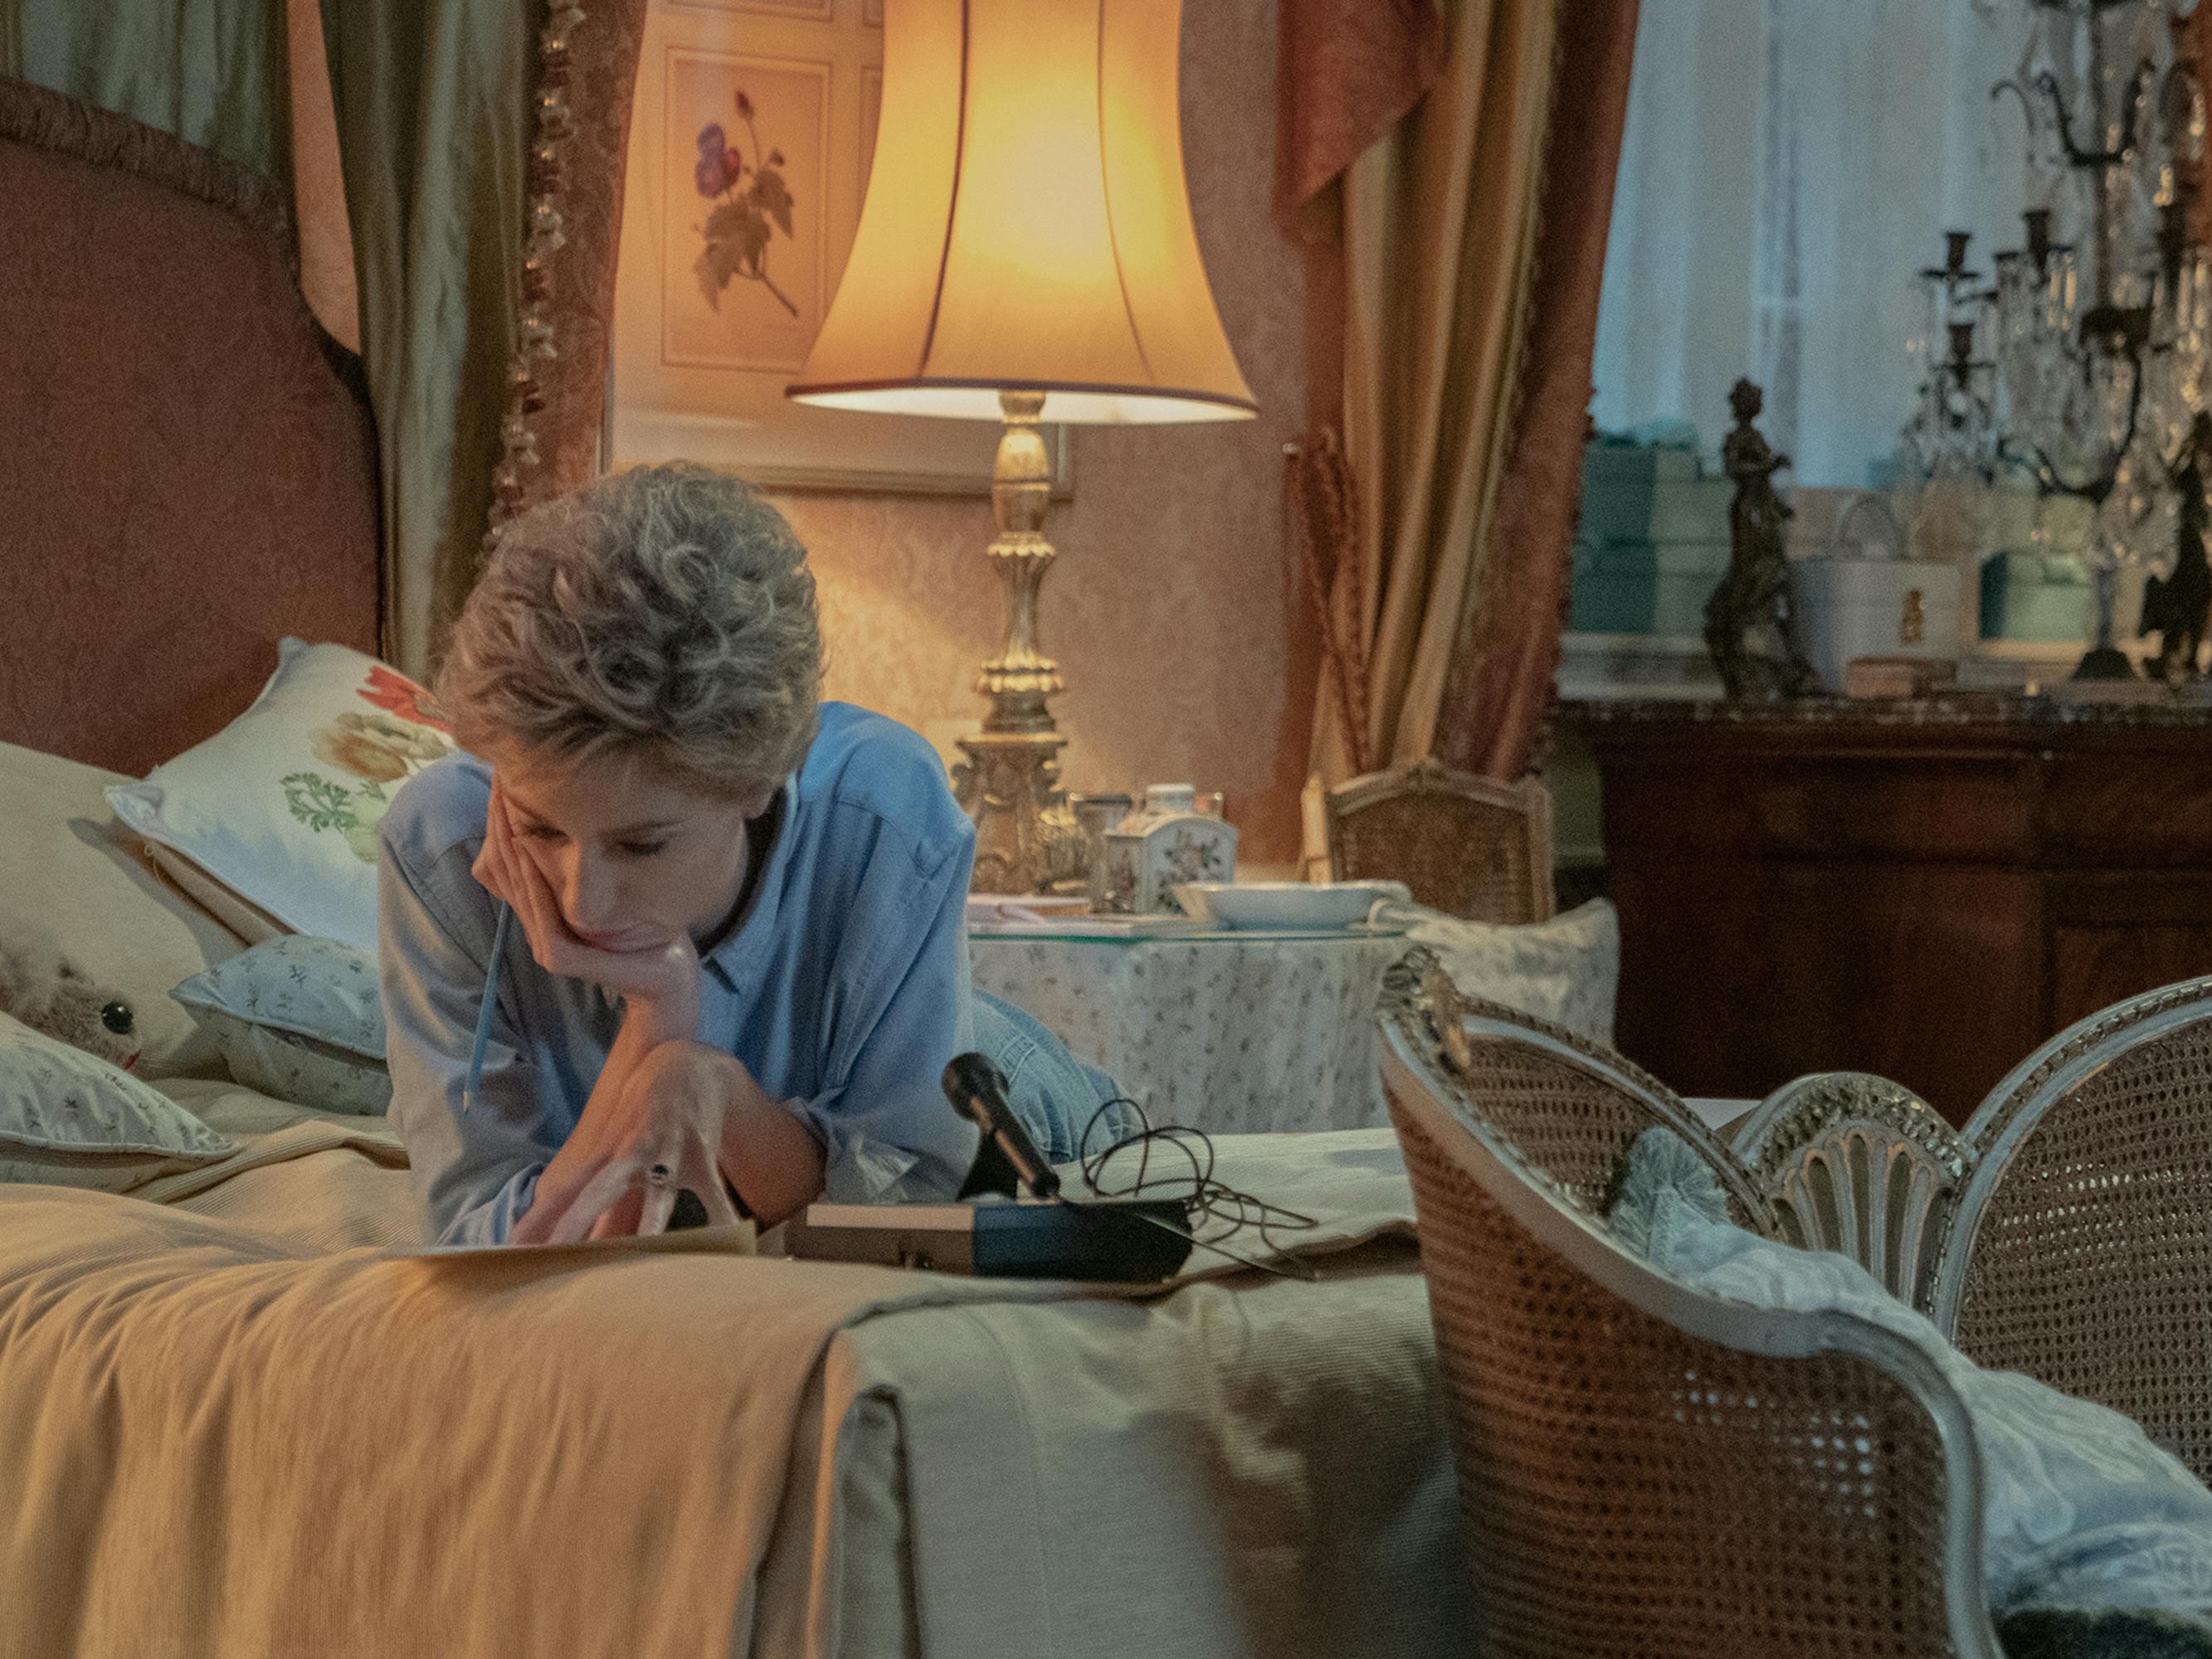 Princess Diana (Elizabeth Debicki) reads the newspaper while lying on her bed.